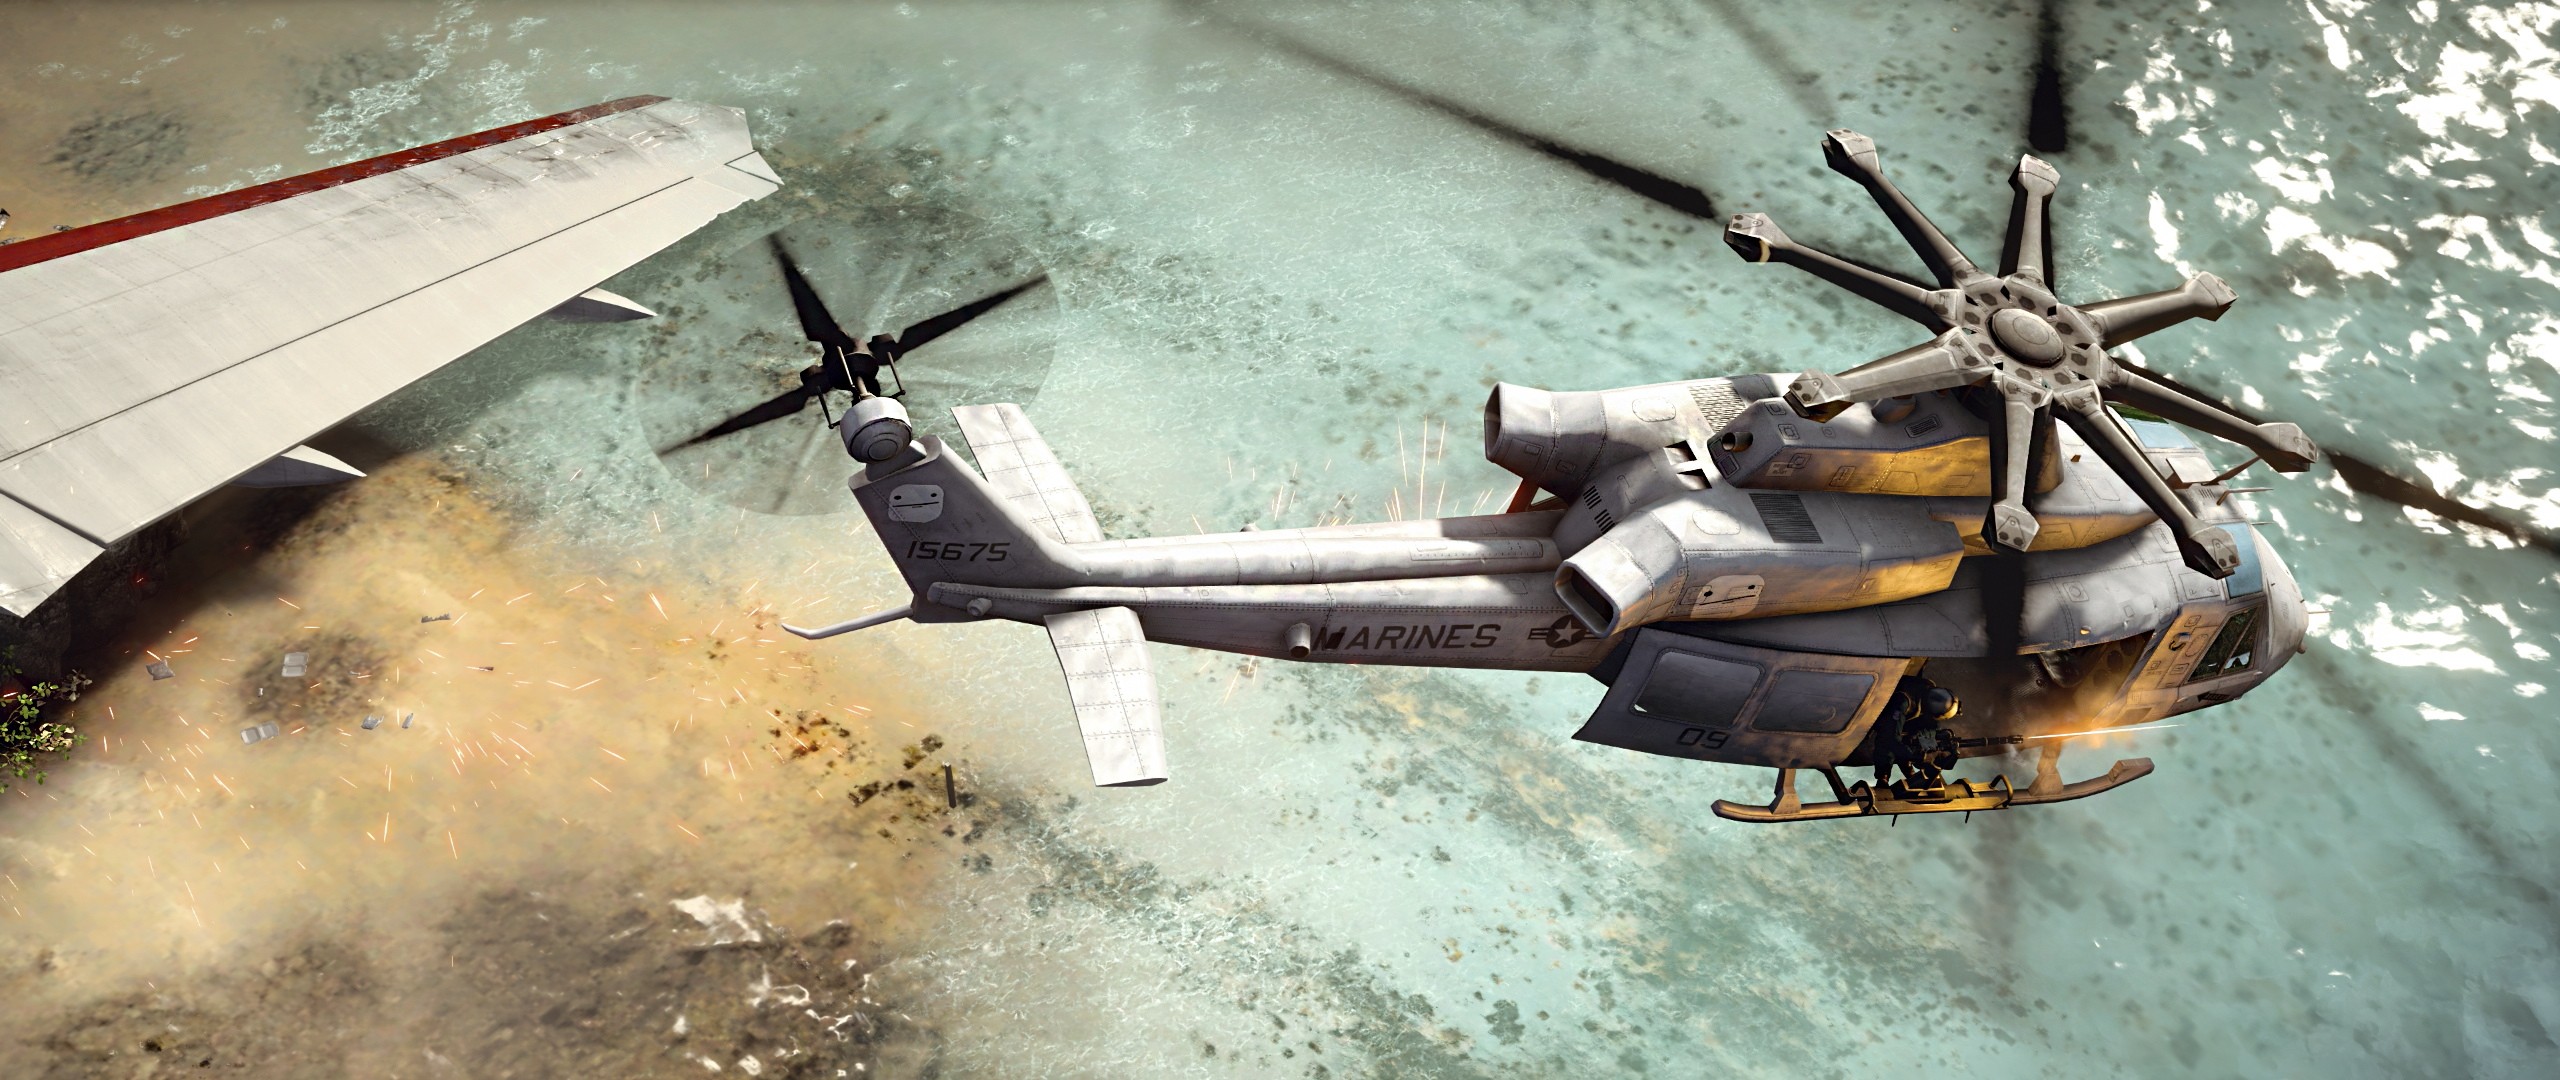 helicopters, UH 1, Aerial view, Beach, Battlefield 4 Wallpaper